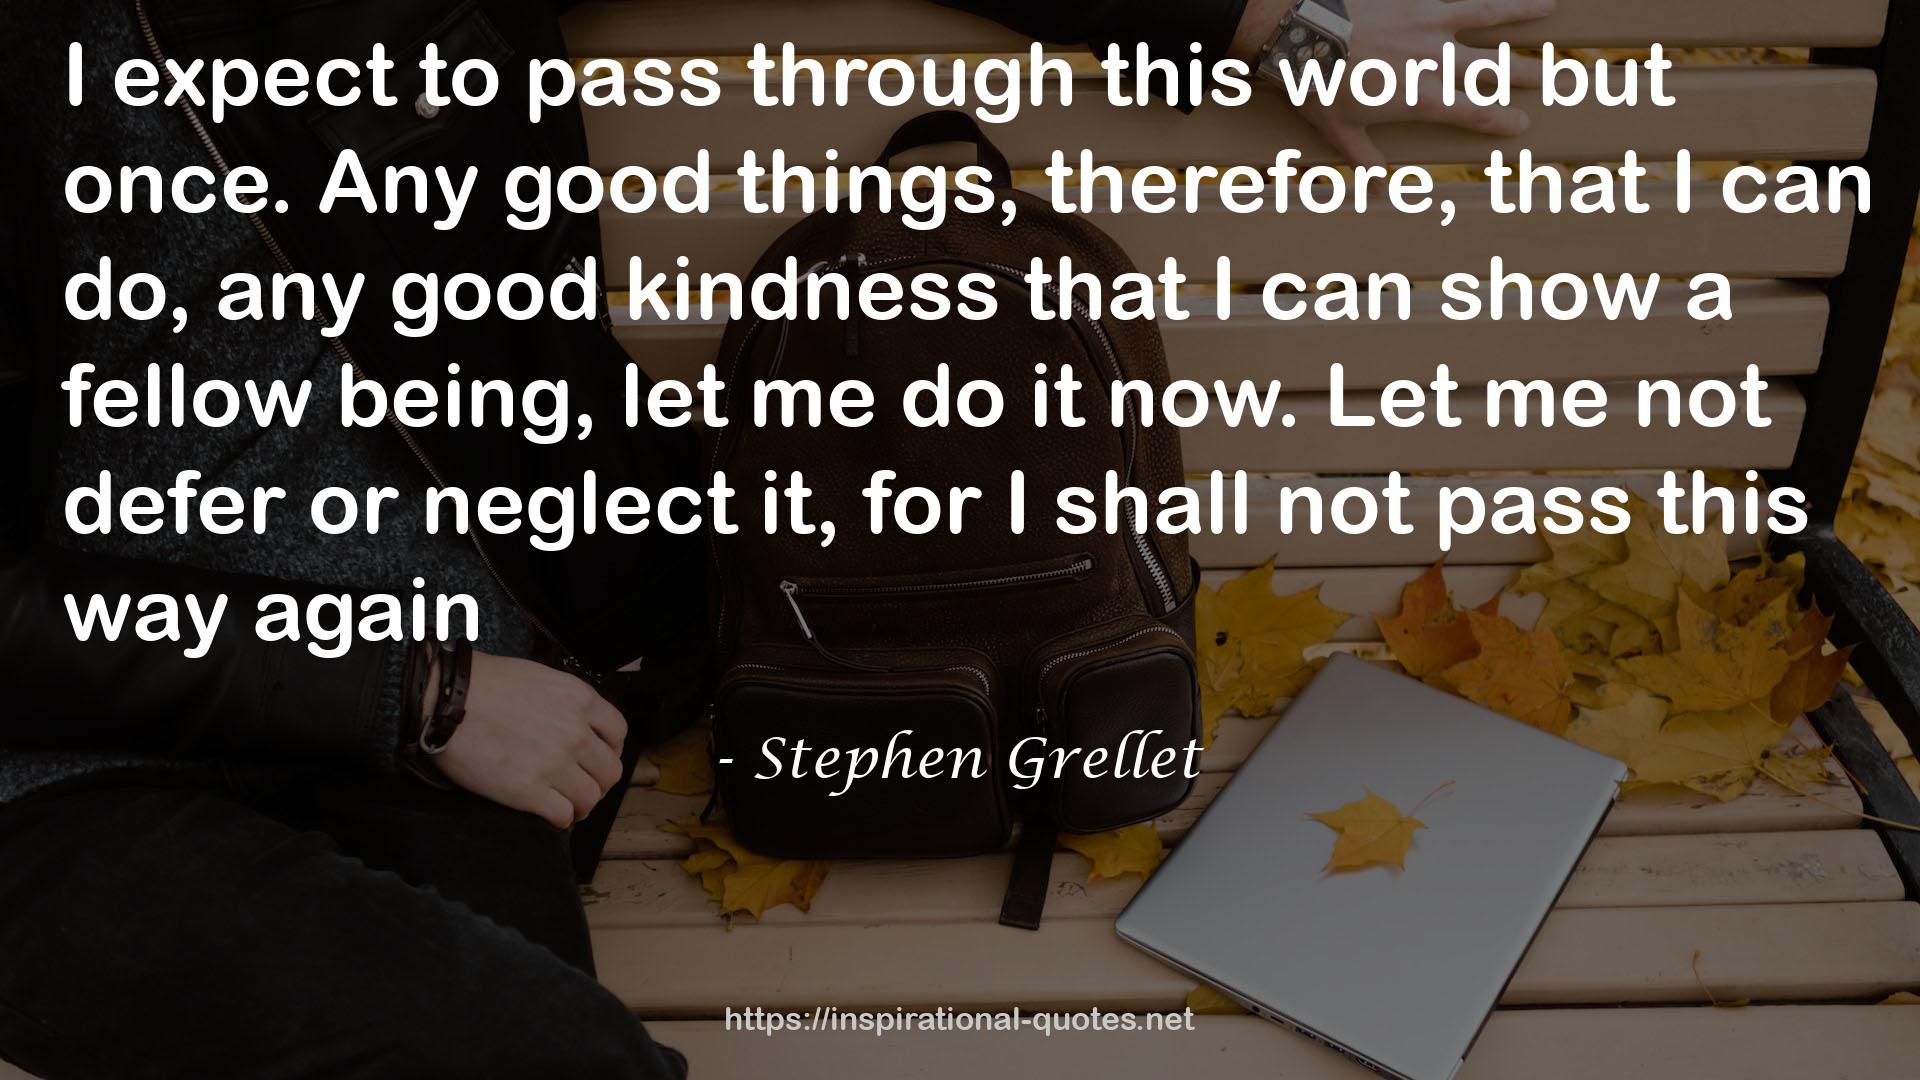 Stephen Grellet QUOTES